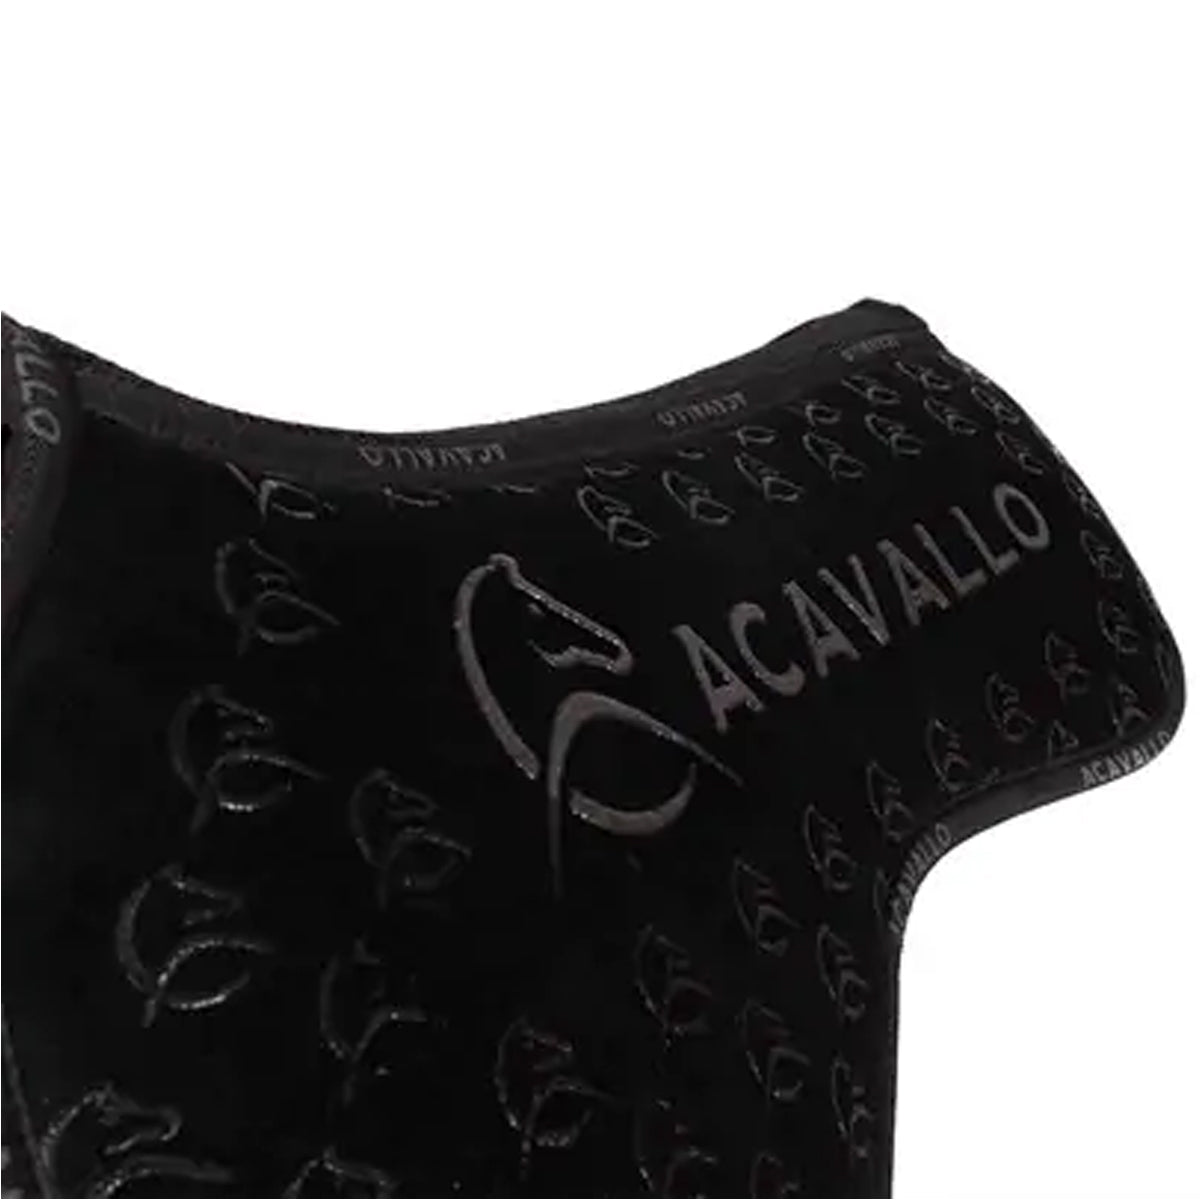 Acavallo Spine Free, Close Contact and Memory Foam Half Pad - Silicon Grip